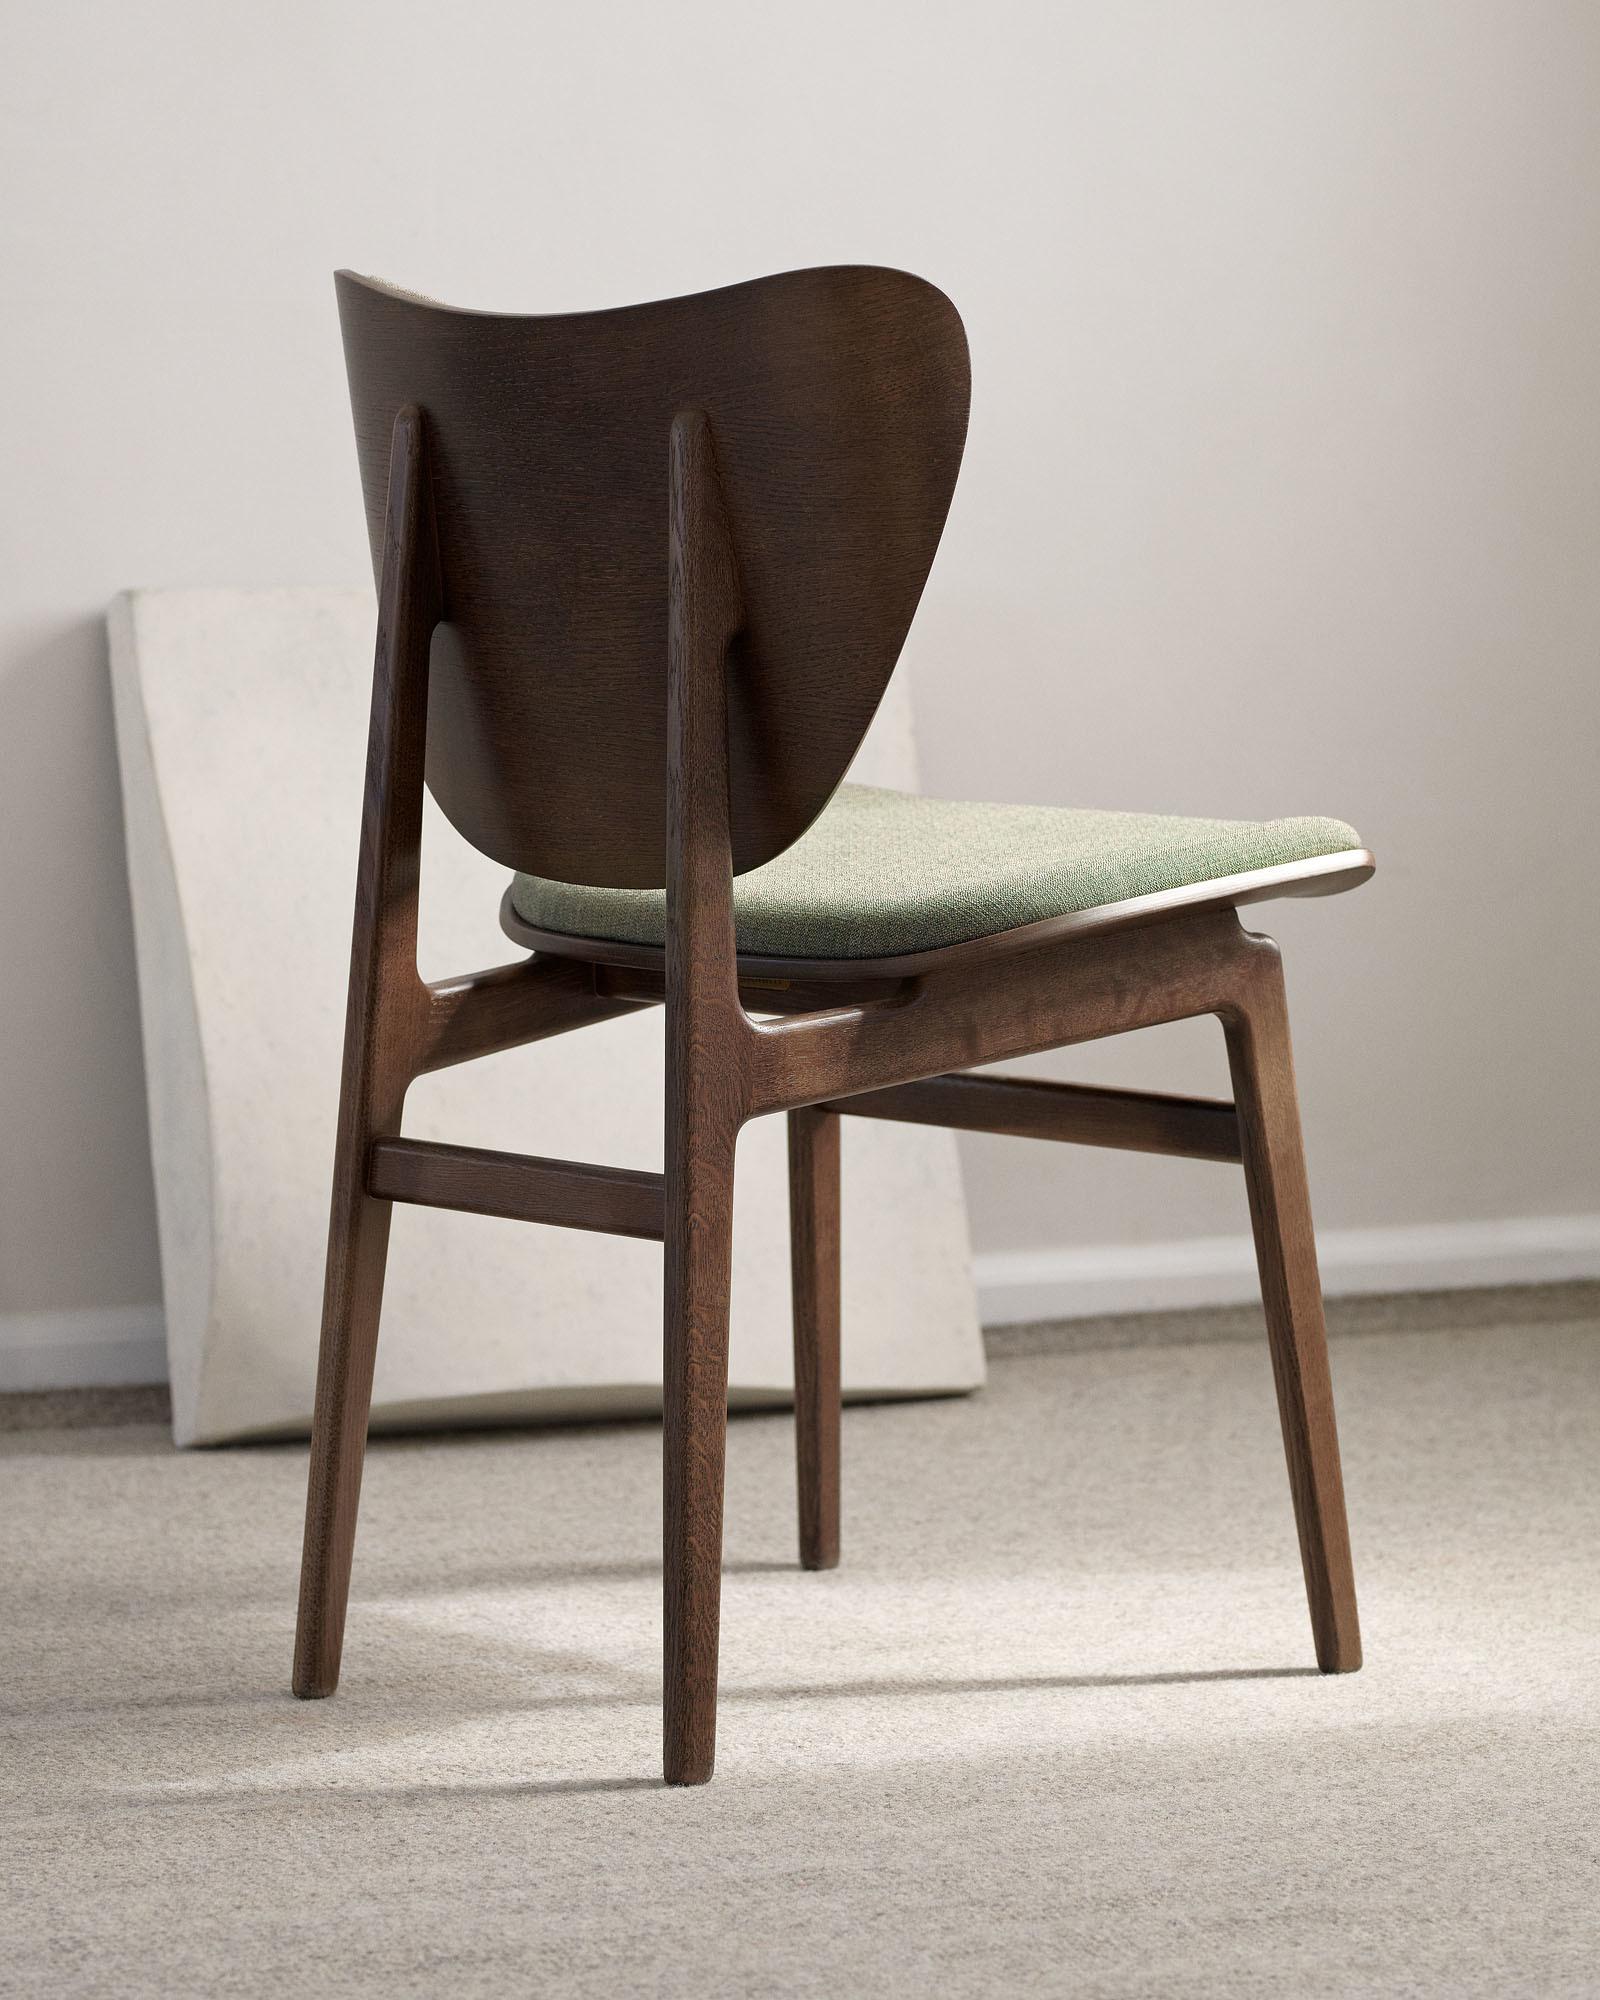 'Elephant' Dining Chair by Norr11, Natural Oak, Leather Camel For Sale 1